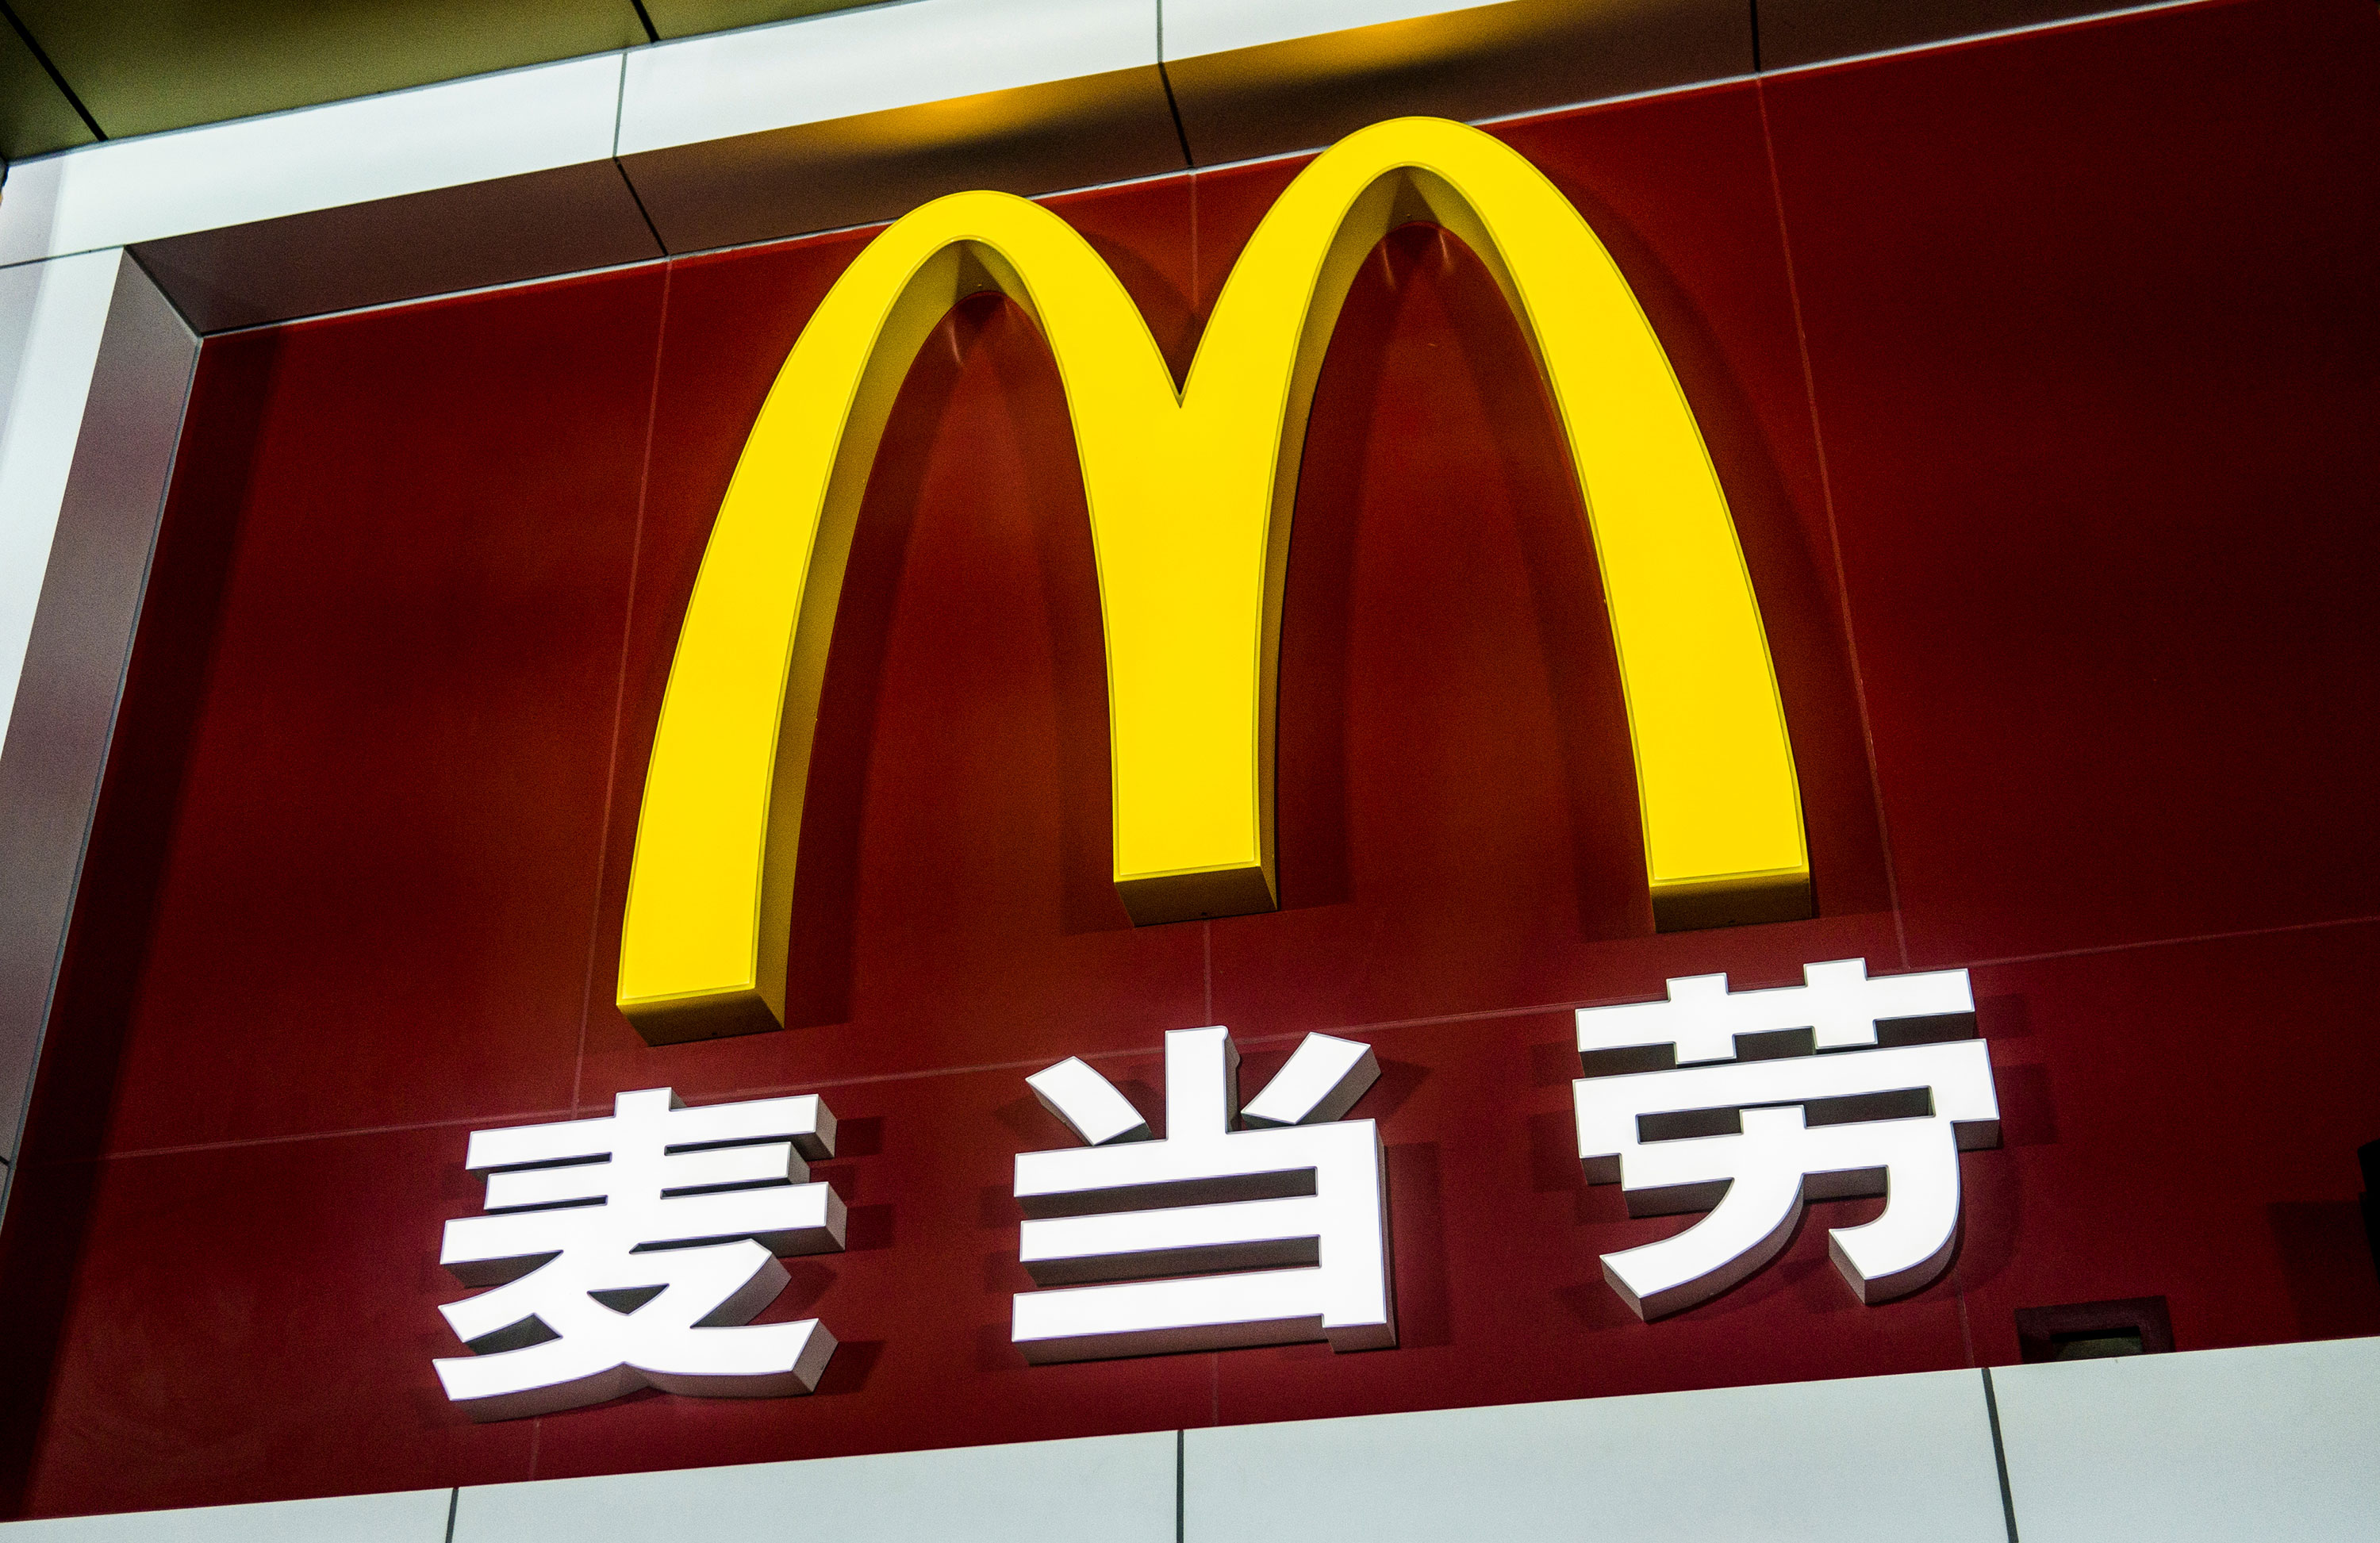 McDonald's is in damage control mode after a restaurant in China displayed a sign banning black people from the premises.